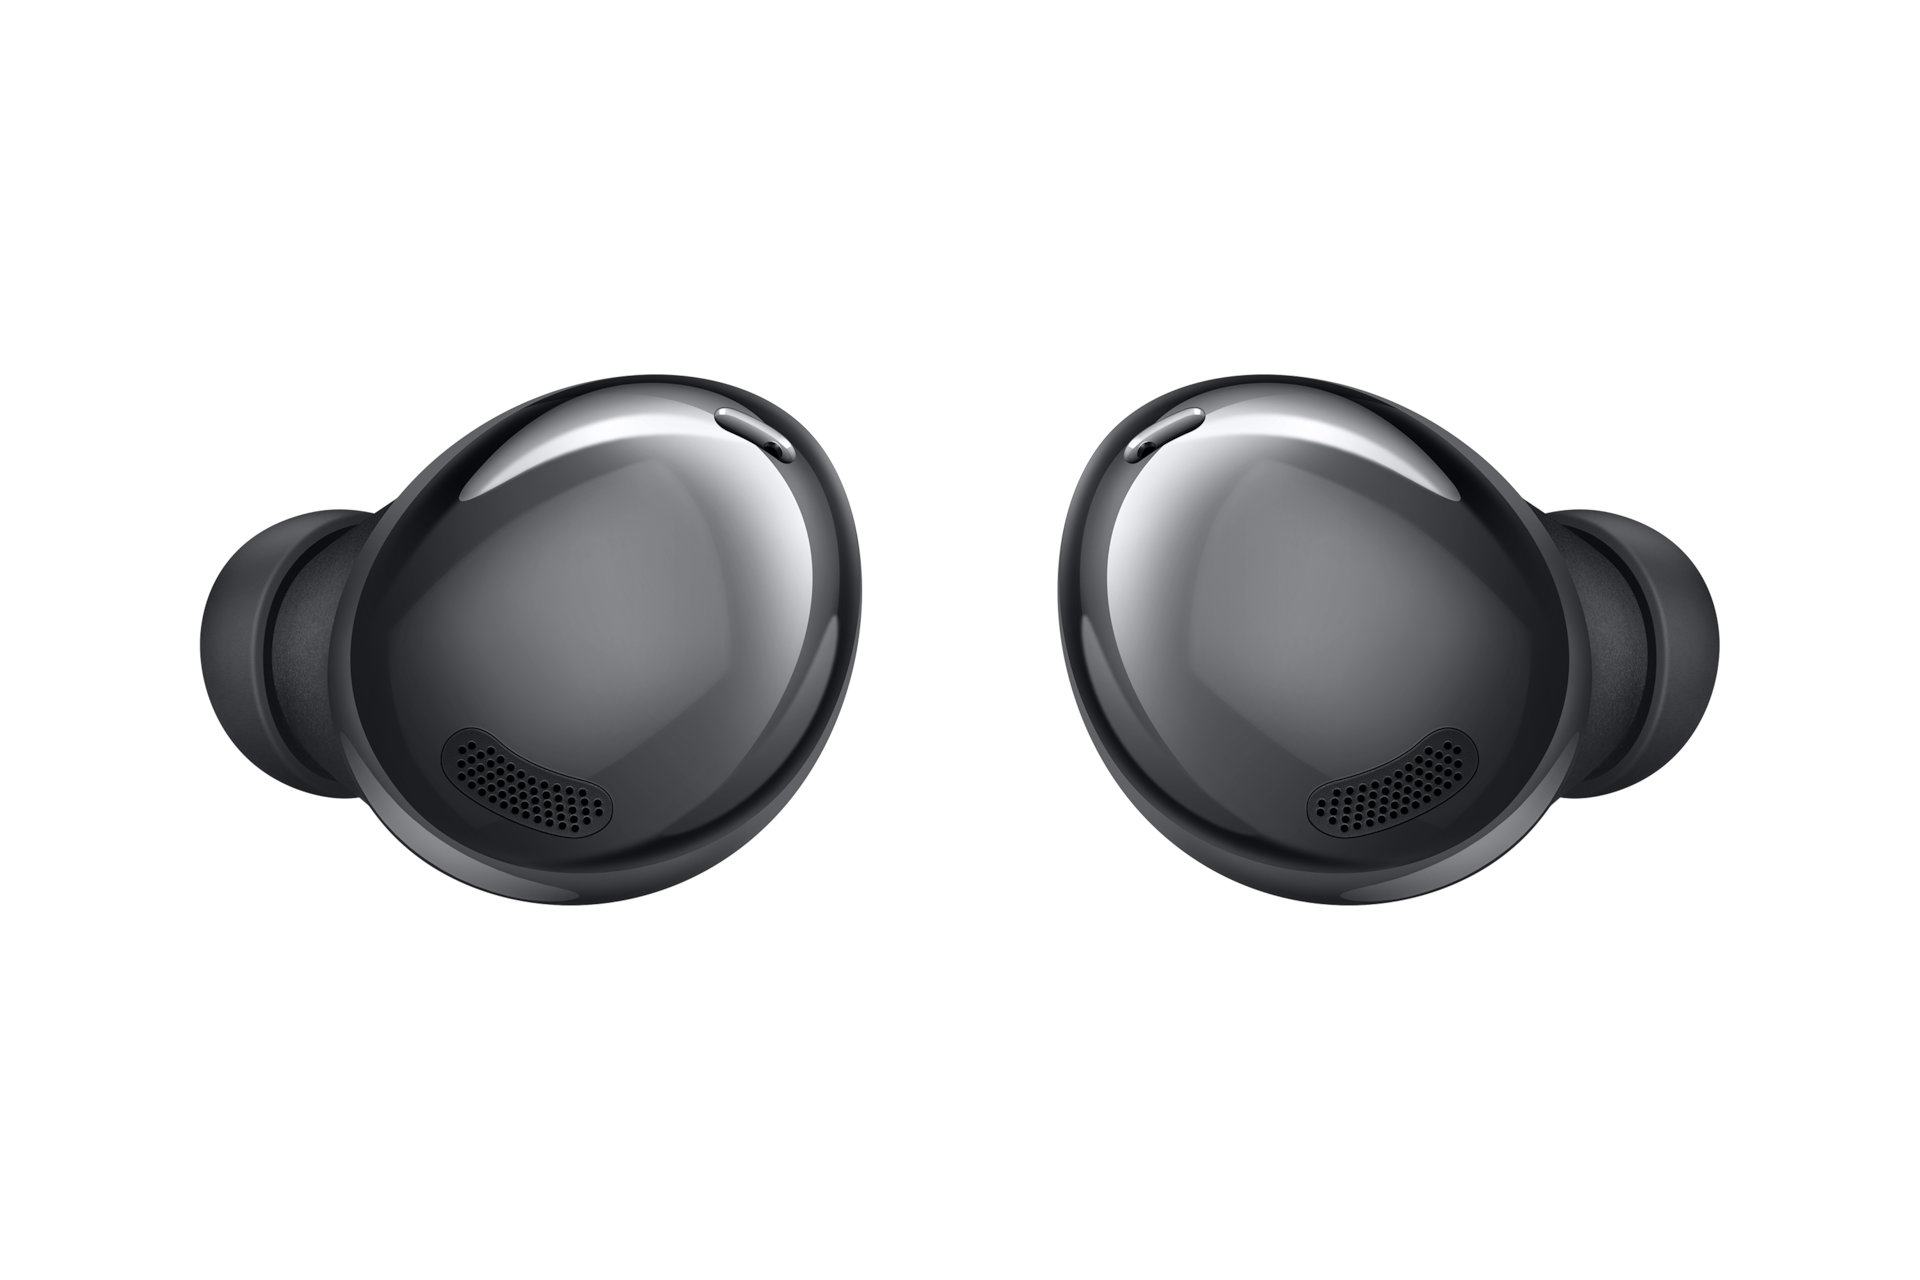 Samsung Galaxy Buds Pro Active Noise Cancelling Wireless Earbud Phantom Black Colour — Front View